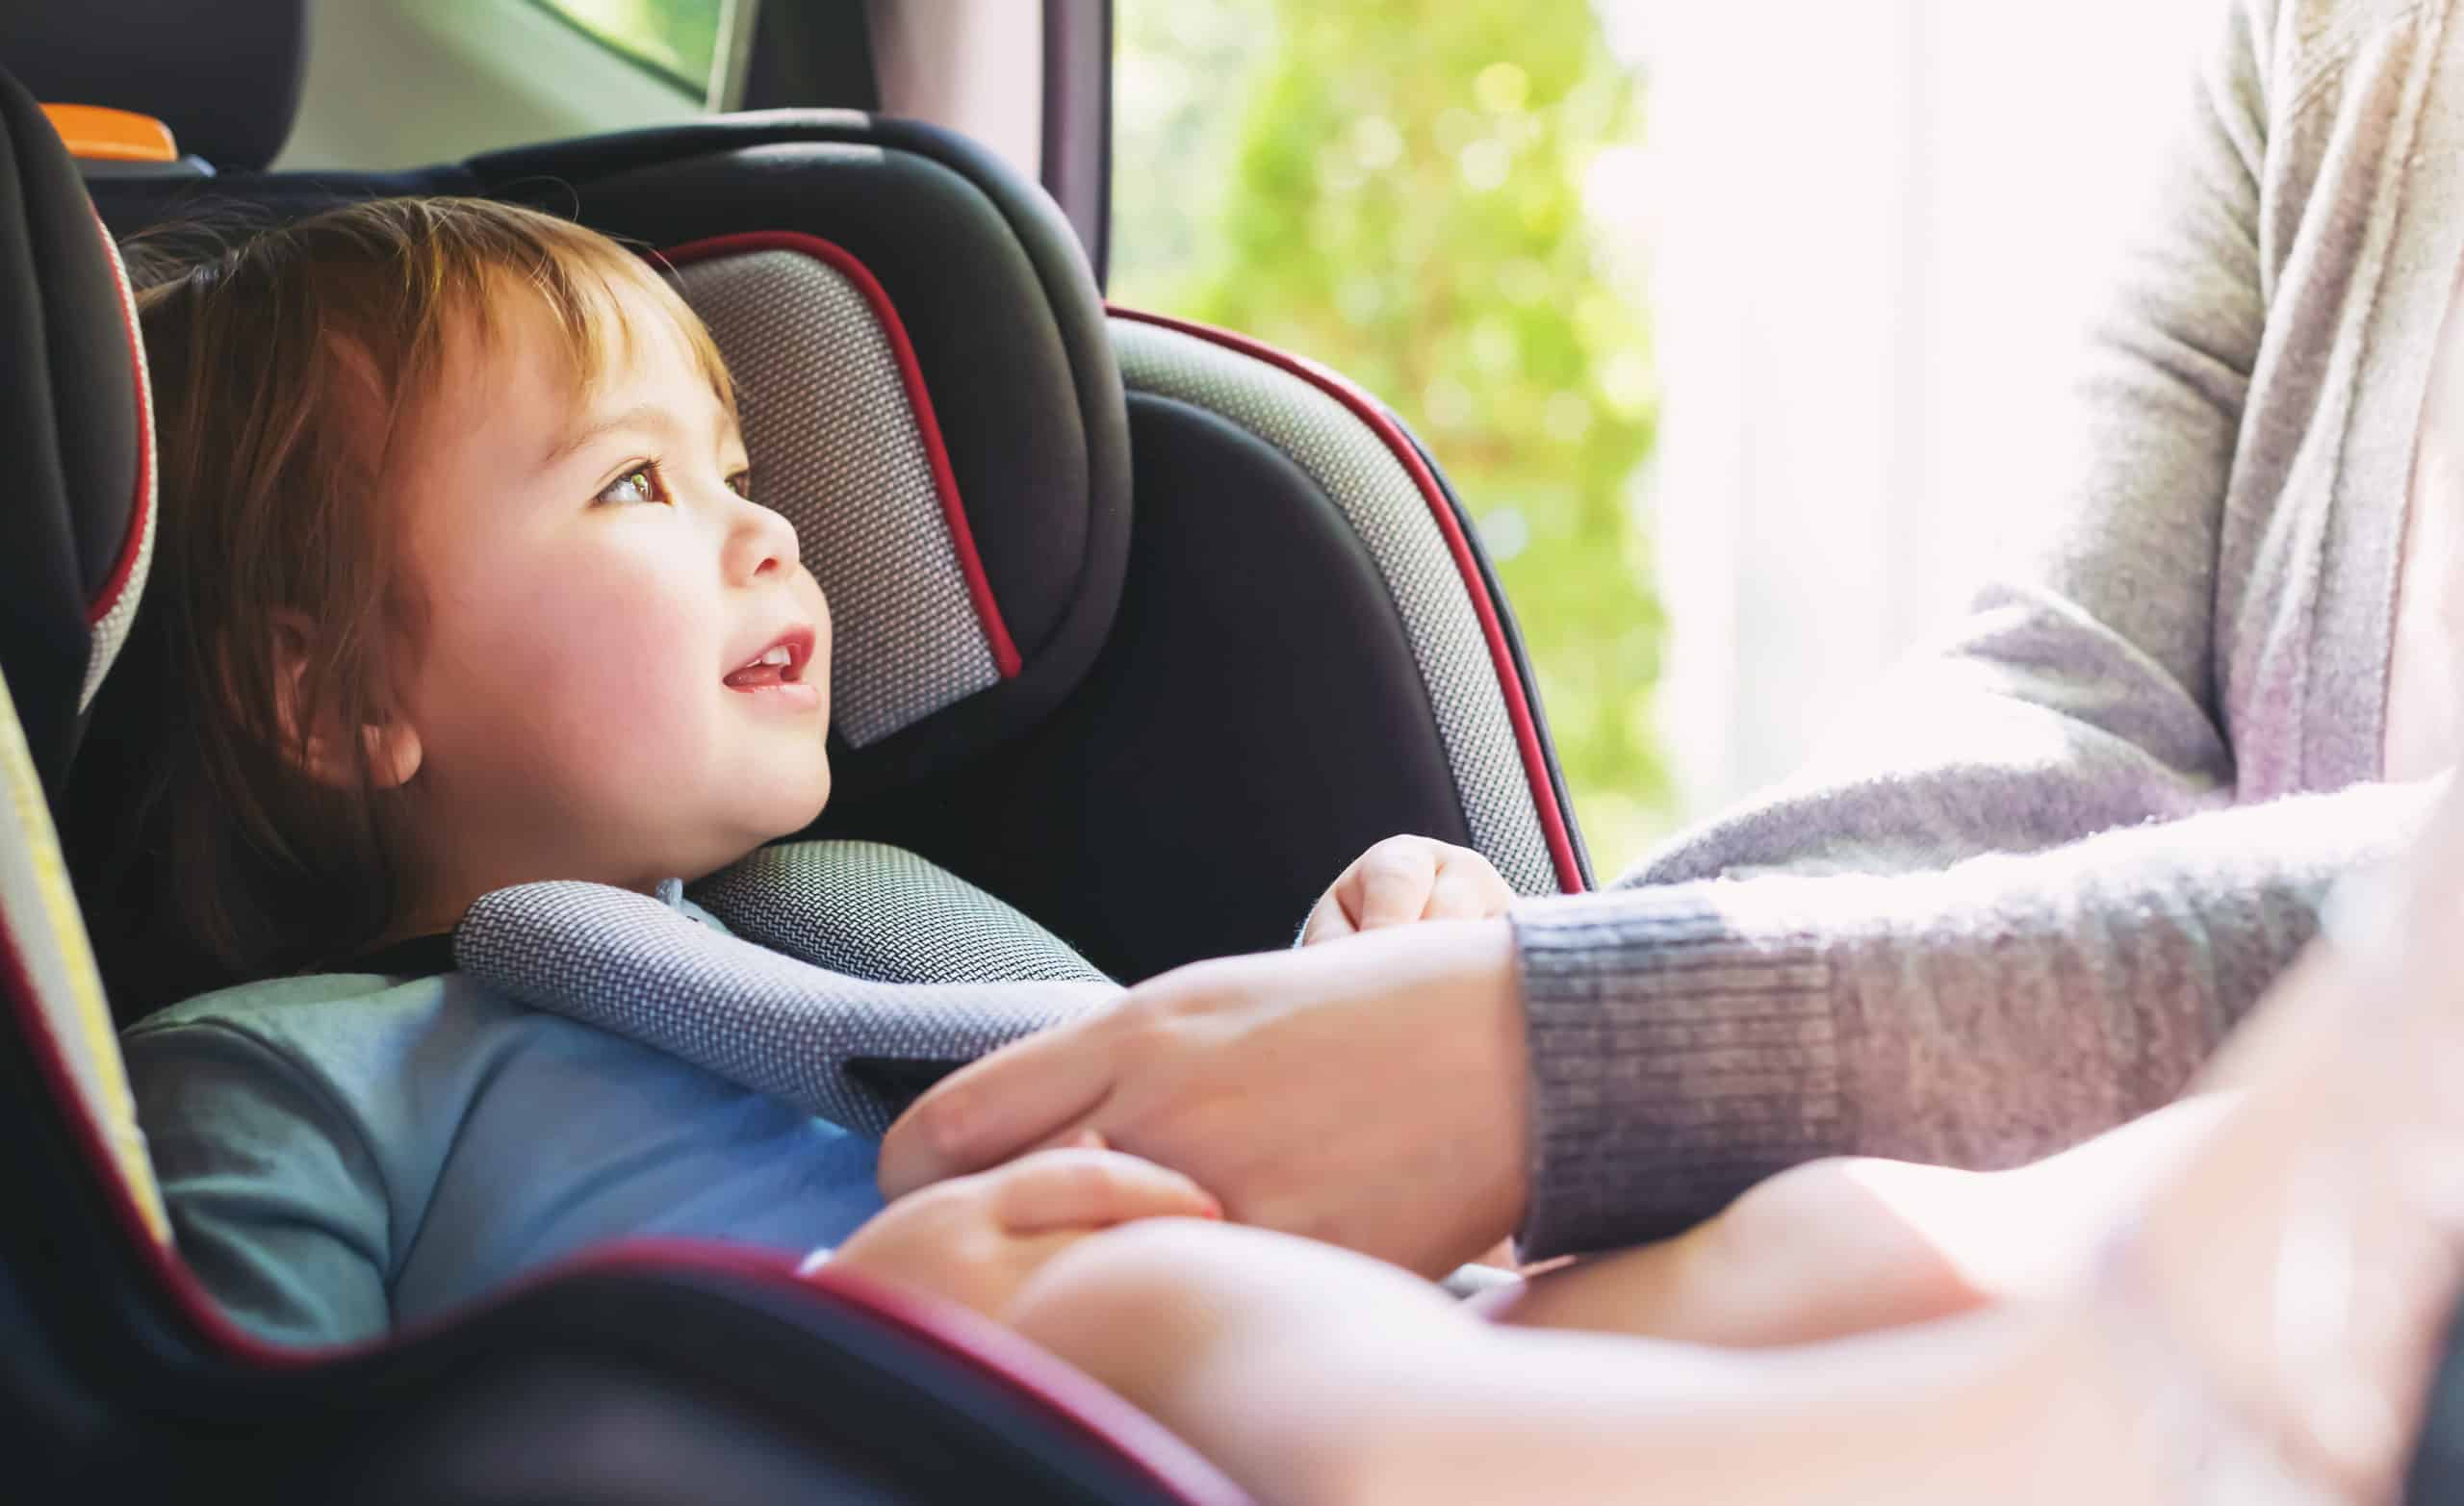 Child in a car seat to prevent child accident injuries